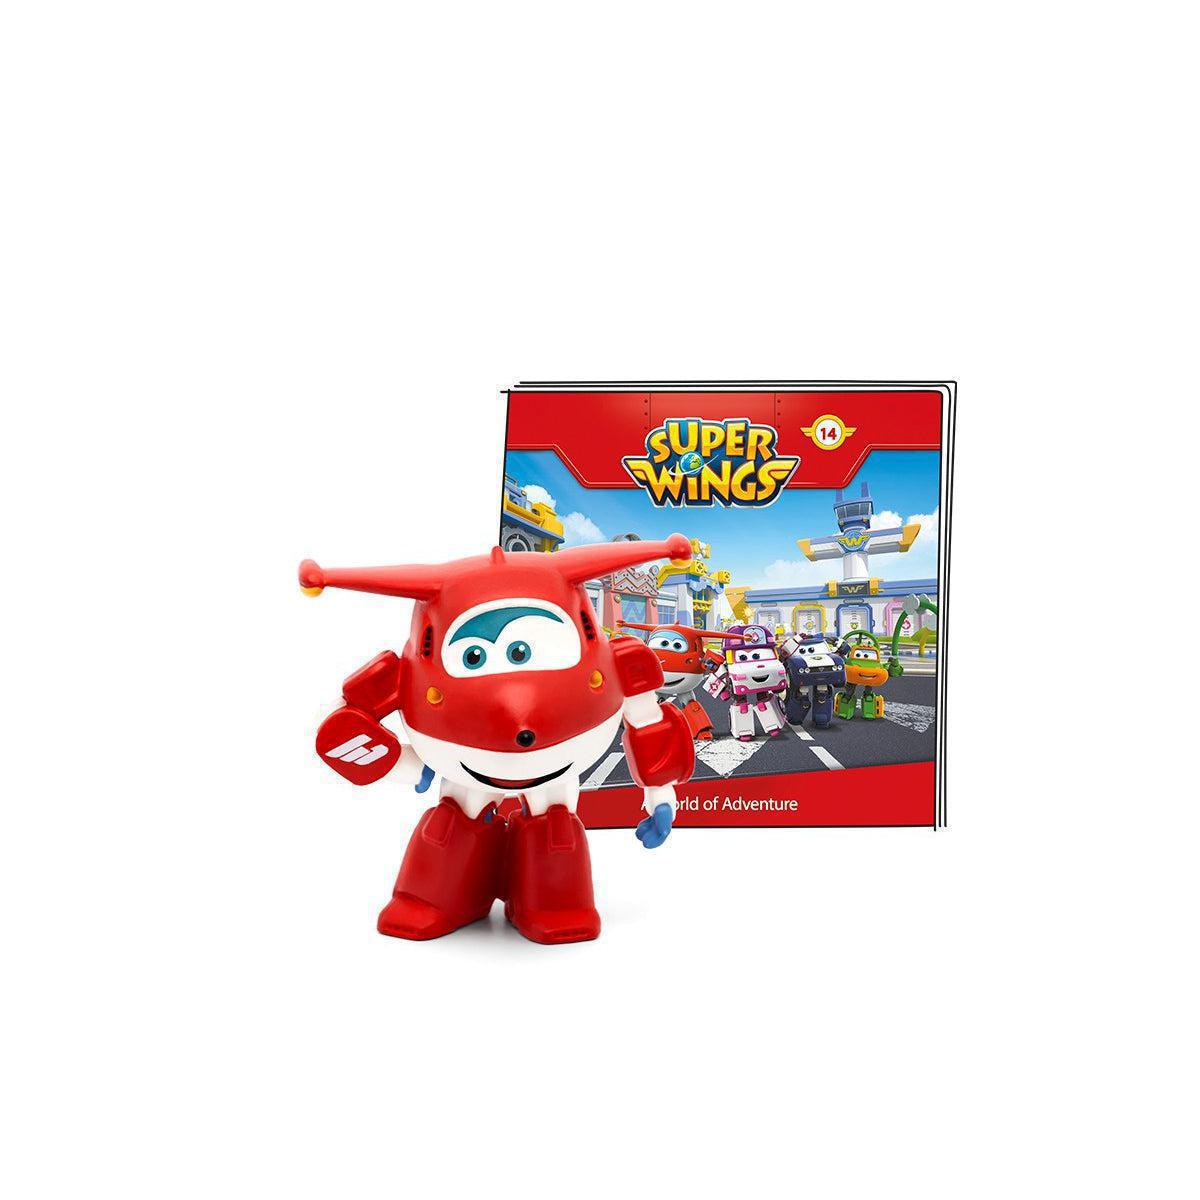 Tonies Super Wings - A World of Adventure - Audio Character for use with Toniebox Player